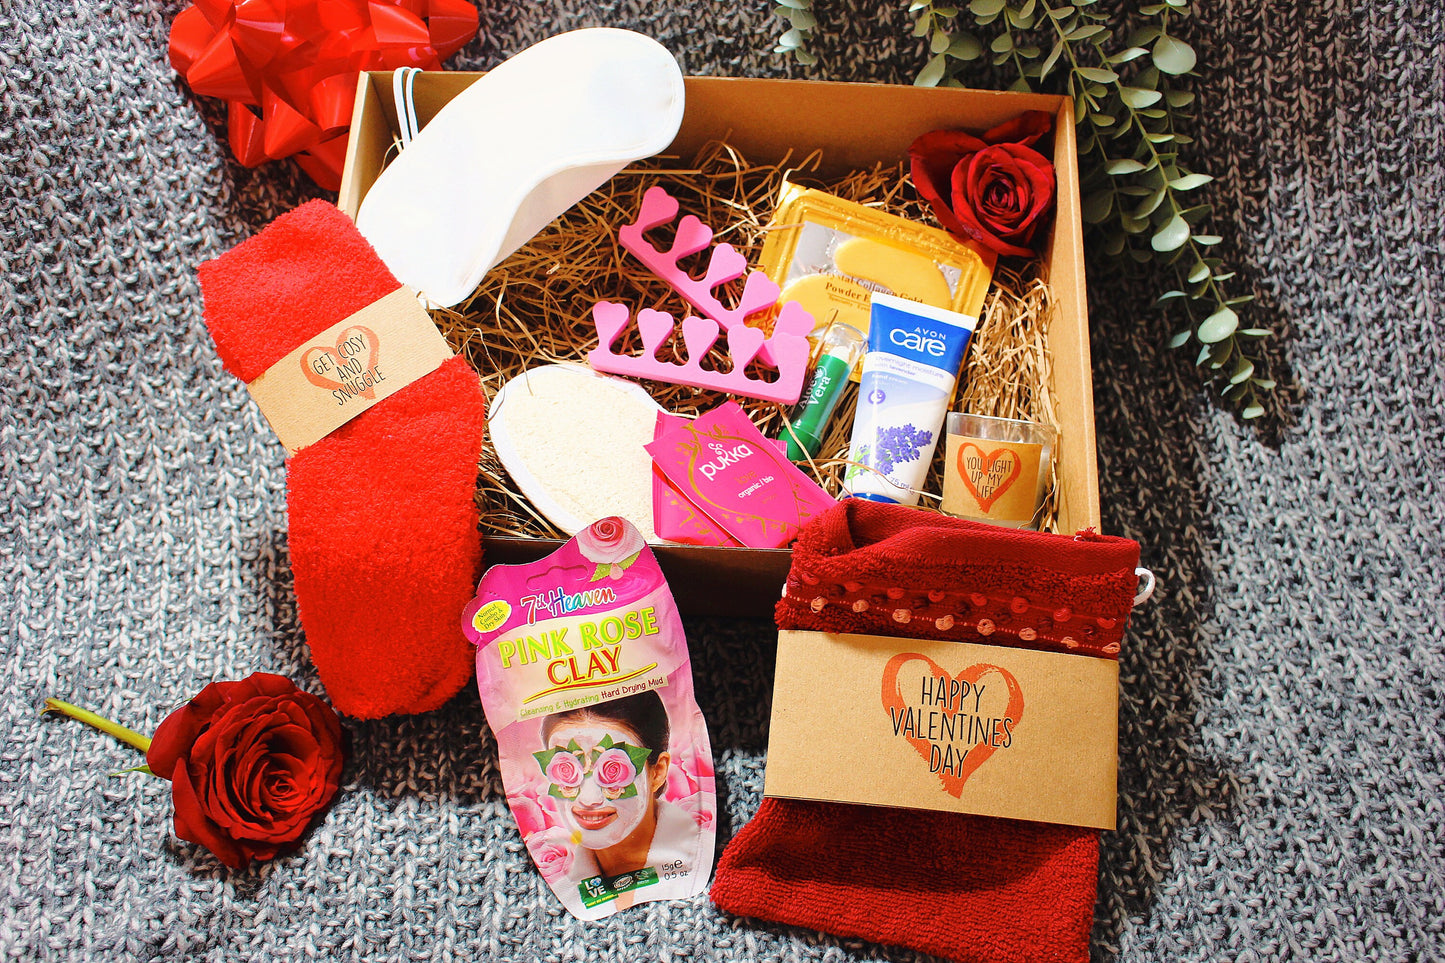 Valentines Day Pamper Gift Box. Date Night hamper. Romantic present. Face Mask Bath Bomb Slippers Jewellery Candle. Personalised message.